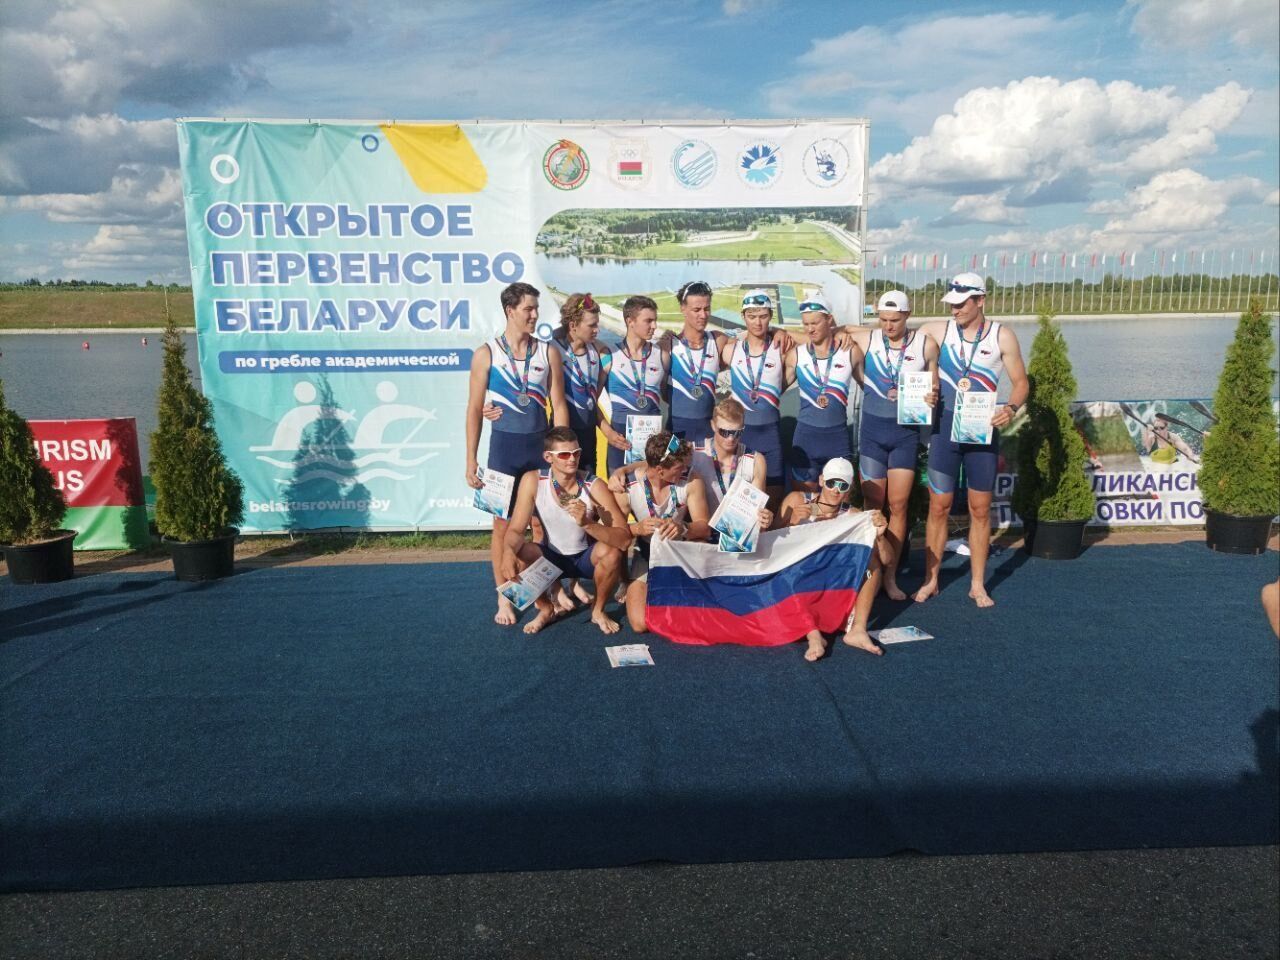 The Russian national team was not allowed to go to Germany for the European Rowing Championships